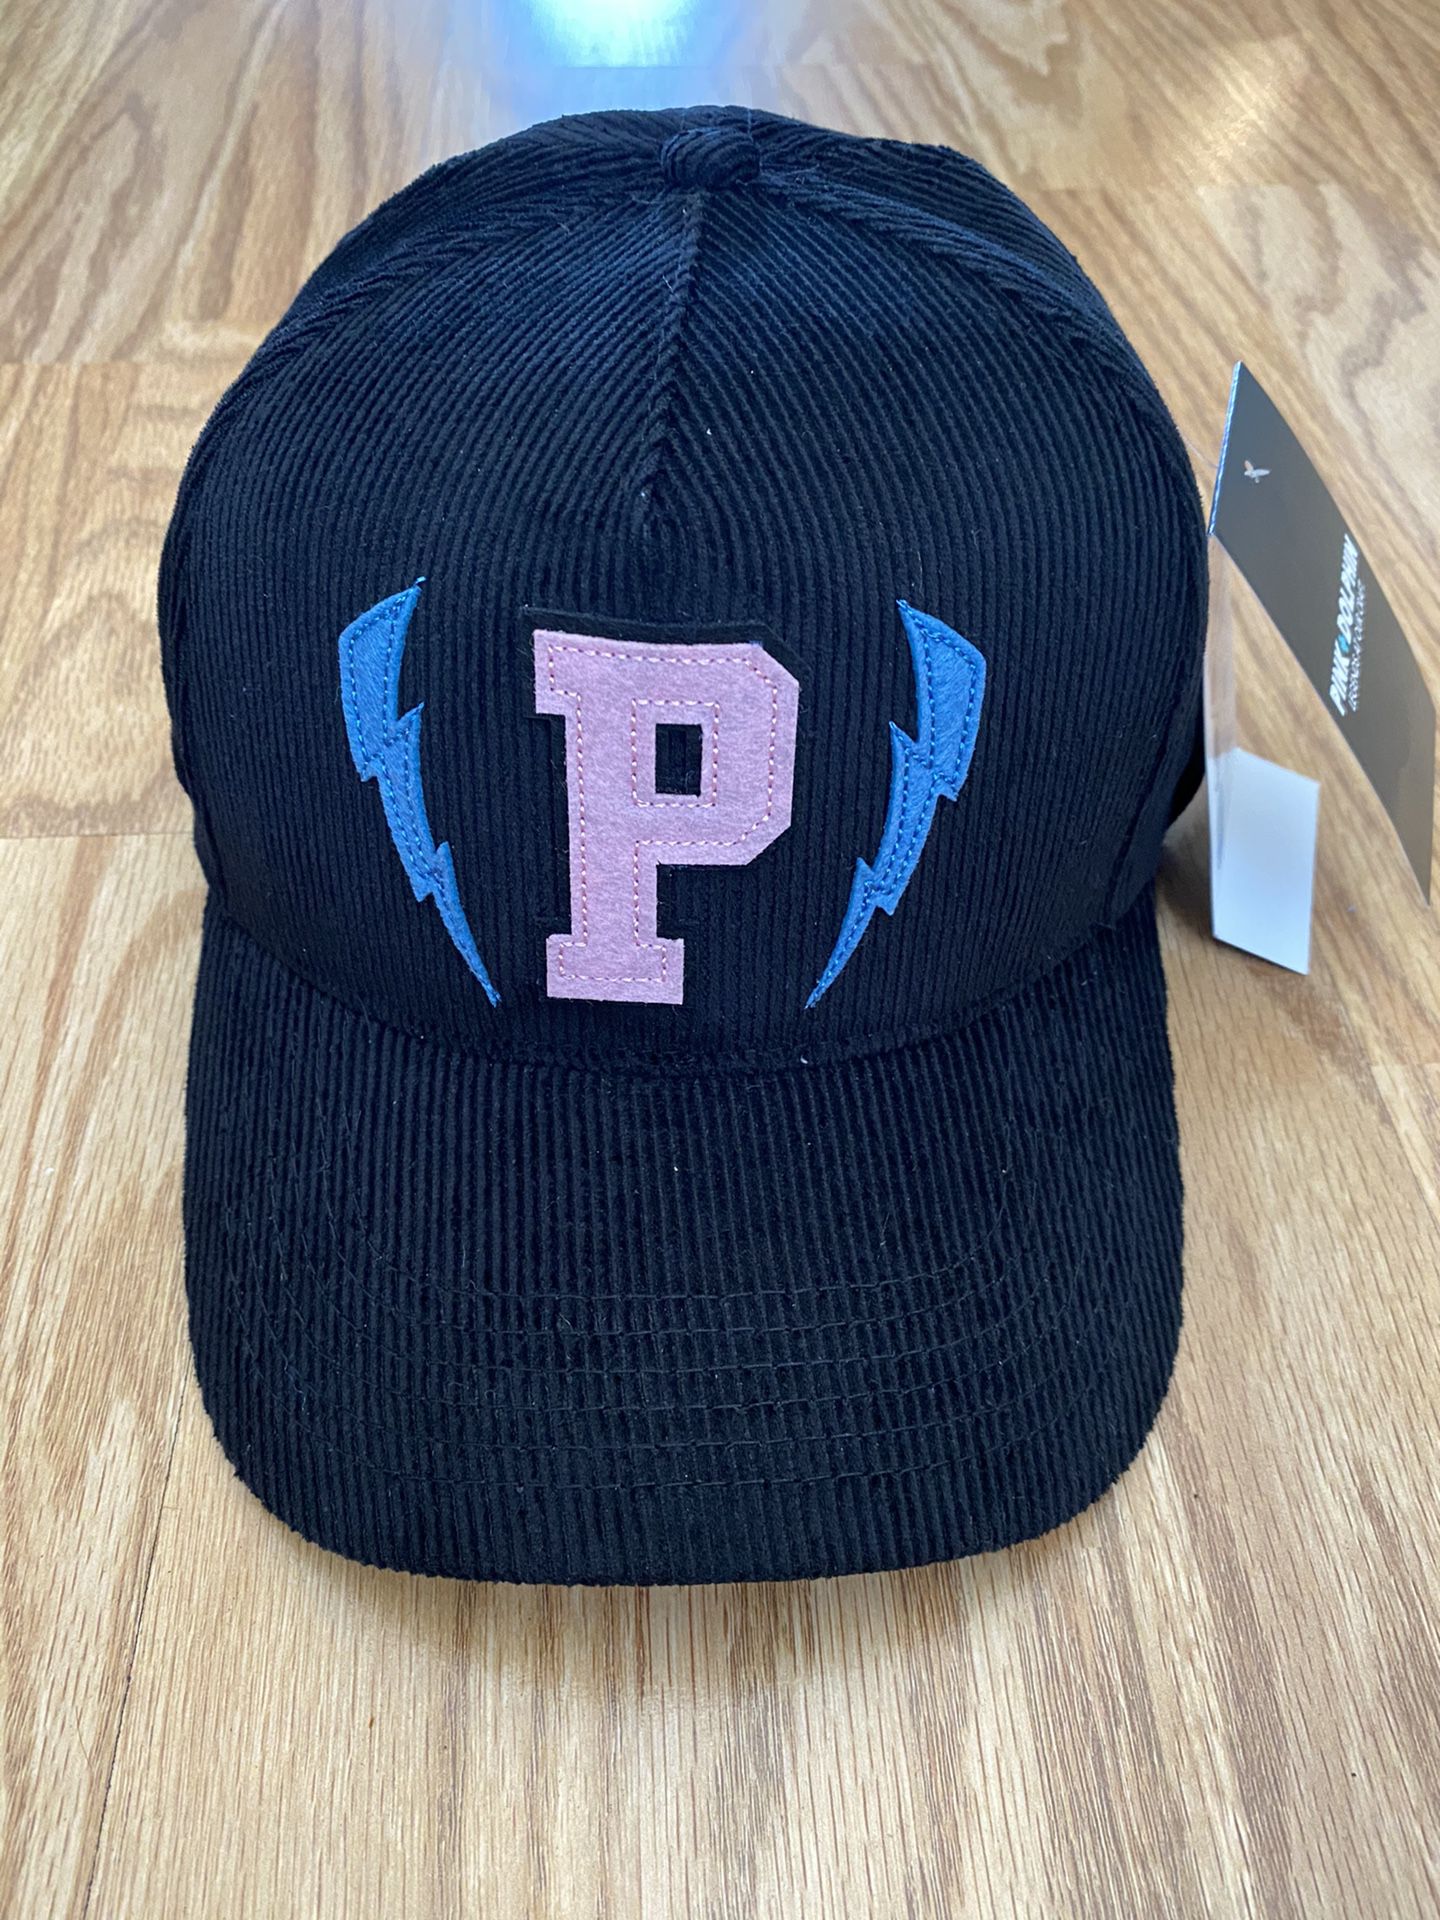 NEW PINK DOLPHIN CORDUROY LIGHTNING P HAT IN BLACK/PINK **SOLD OUT STYLE**